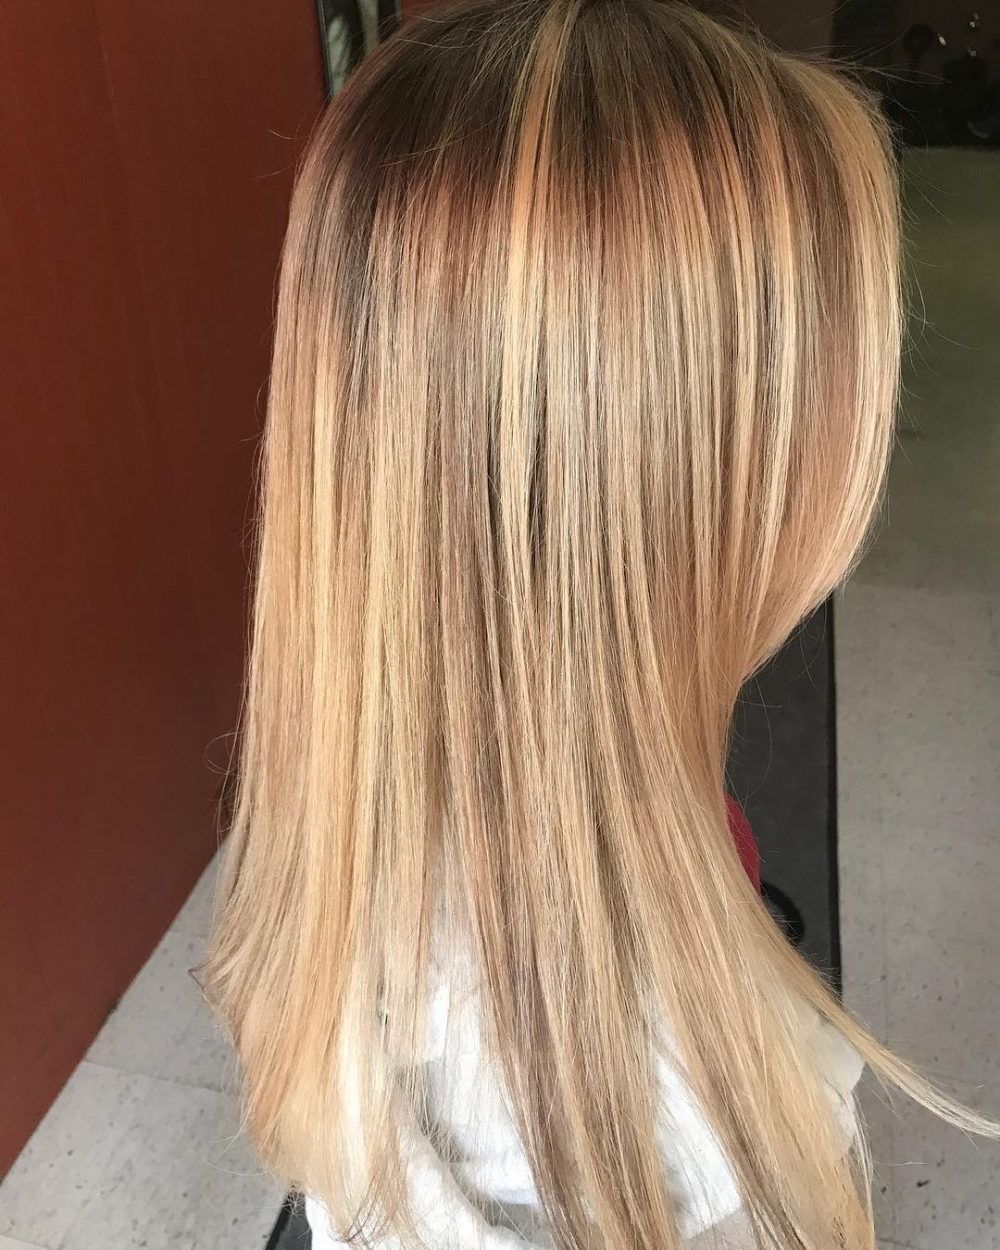 21 Hottest Honey Blonde Hair Color Ideas Of 2018 Intended For Well Known Honey Blonde Hairstyles (View 20 of 20)